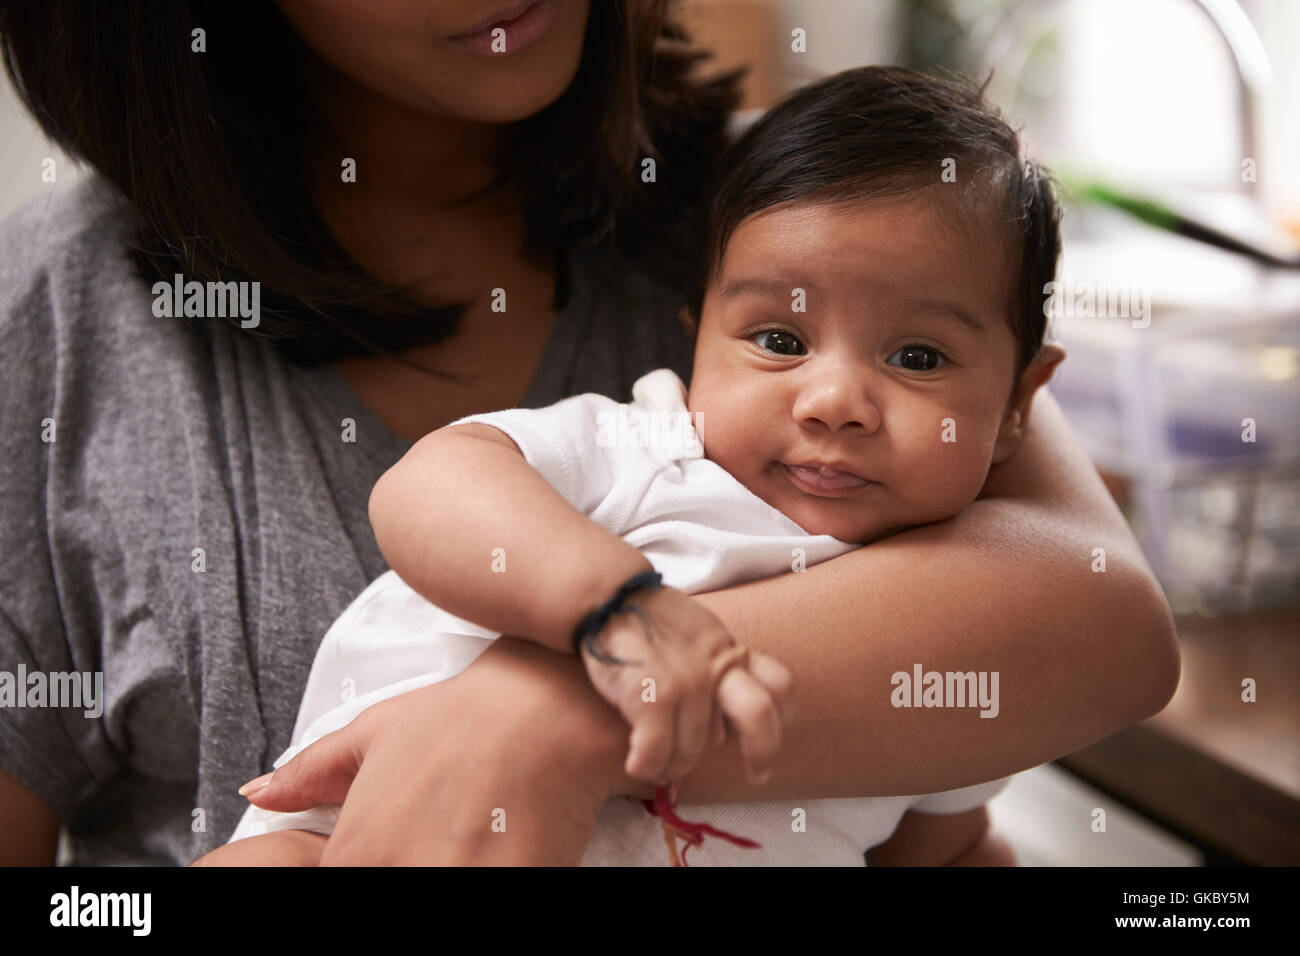 Close Up Of Baby Boy Being Held By Mother Stock Photo